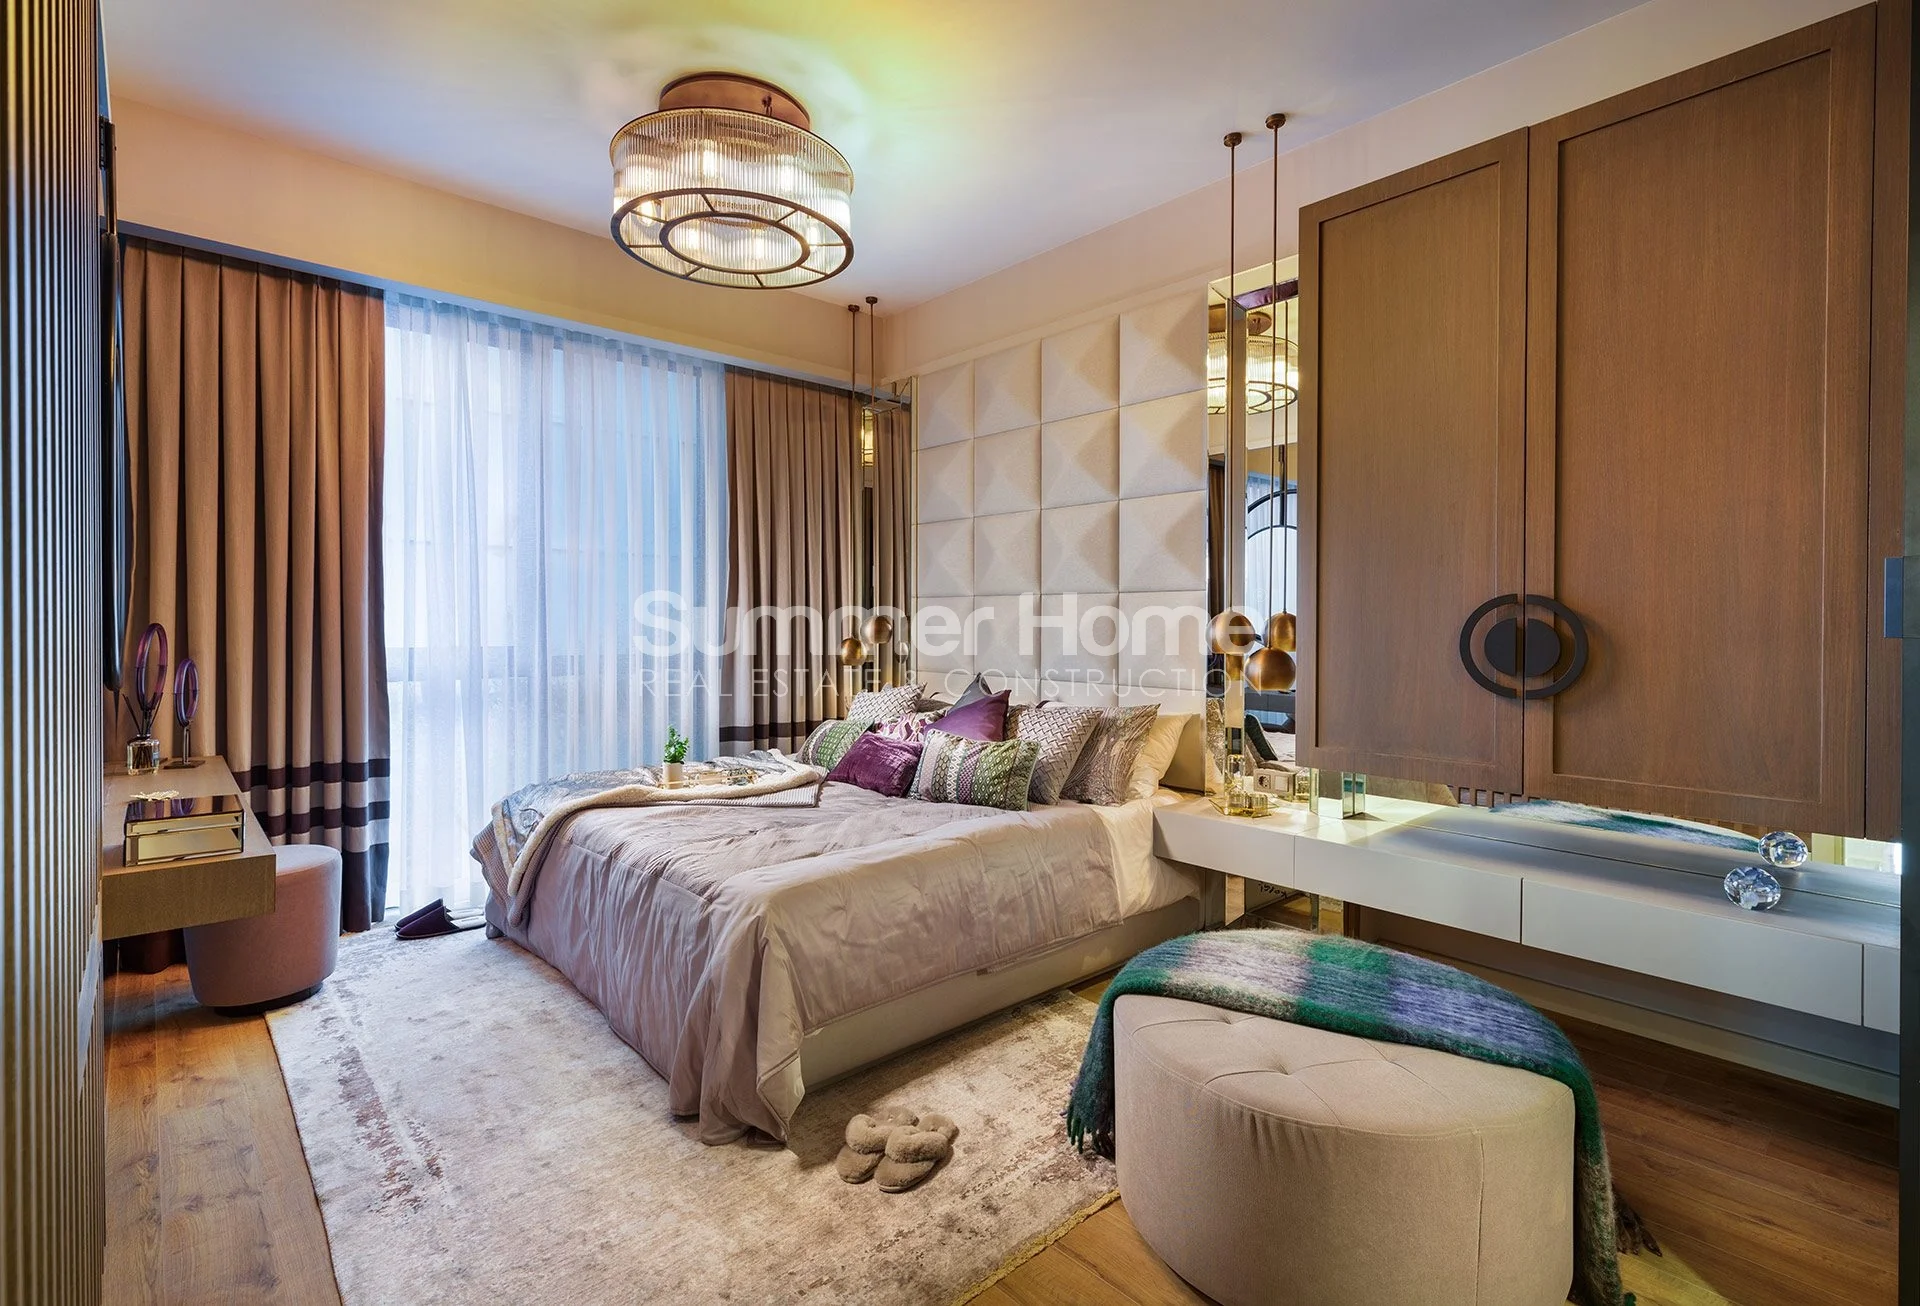 City-like project is designed as a small haven in Atasehir Interior - 23